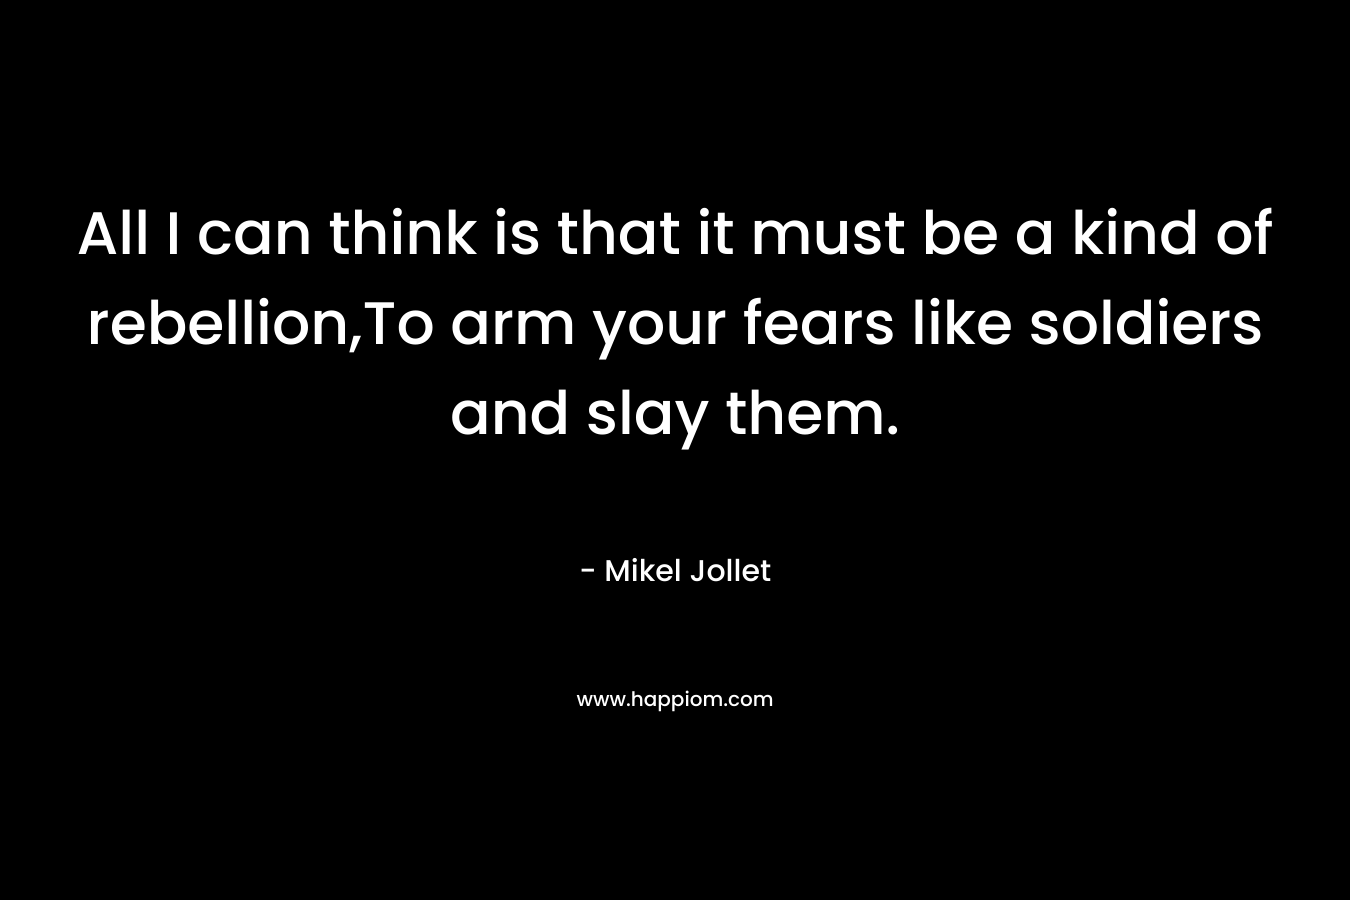 All I can think is that it must be a kind of rebellion,To arm your fears like soldiers and slay them. – Mikel Jollet